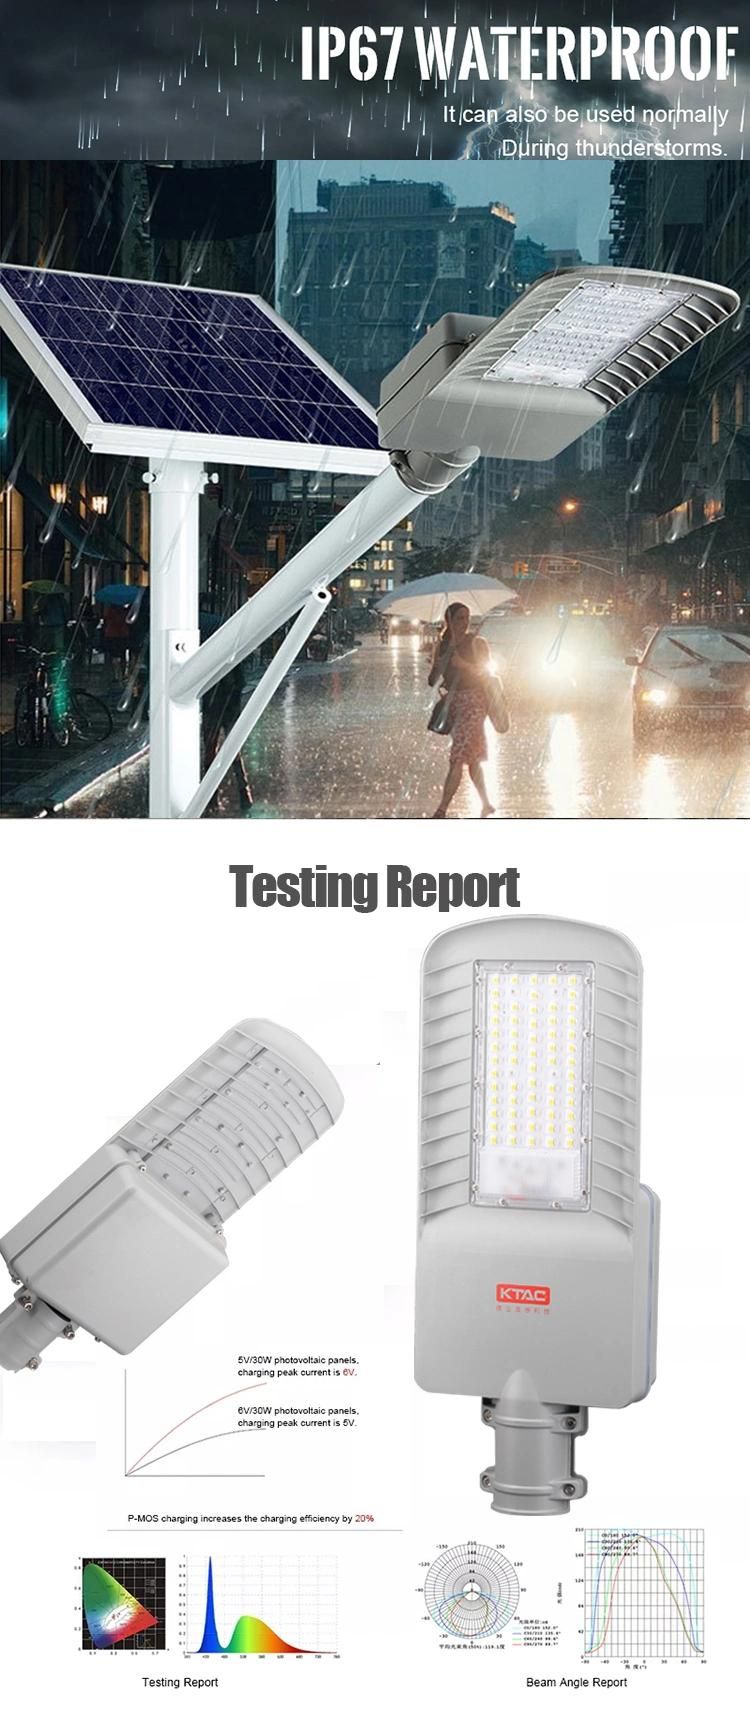 200W Integrated Outdoor LED Lamp Solar Street Light with Lithium Battery